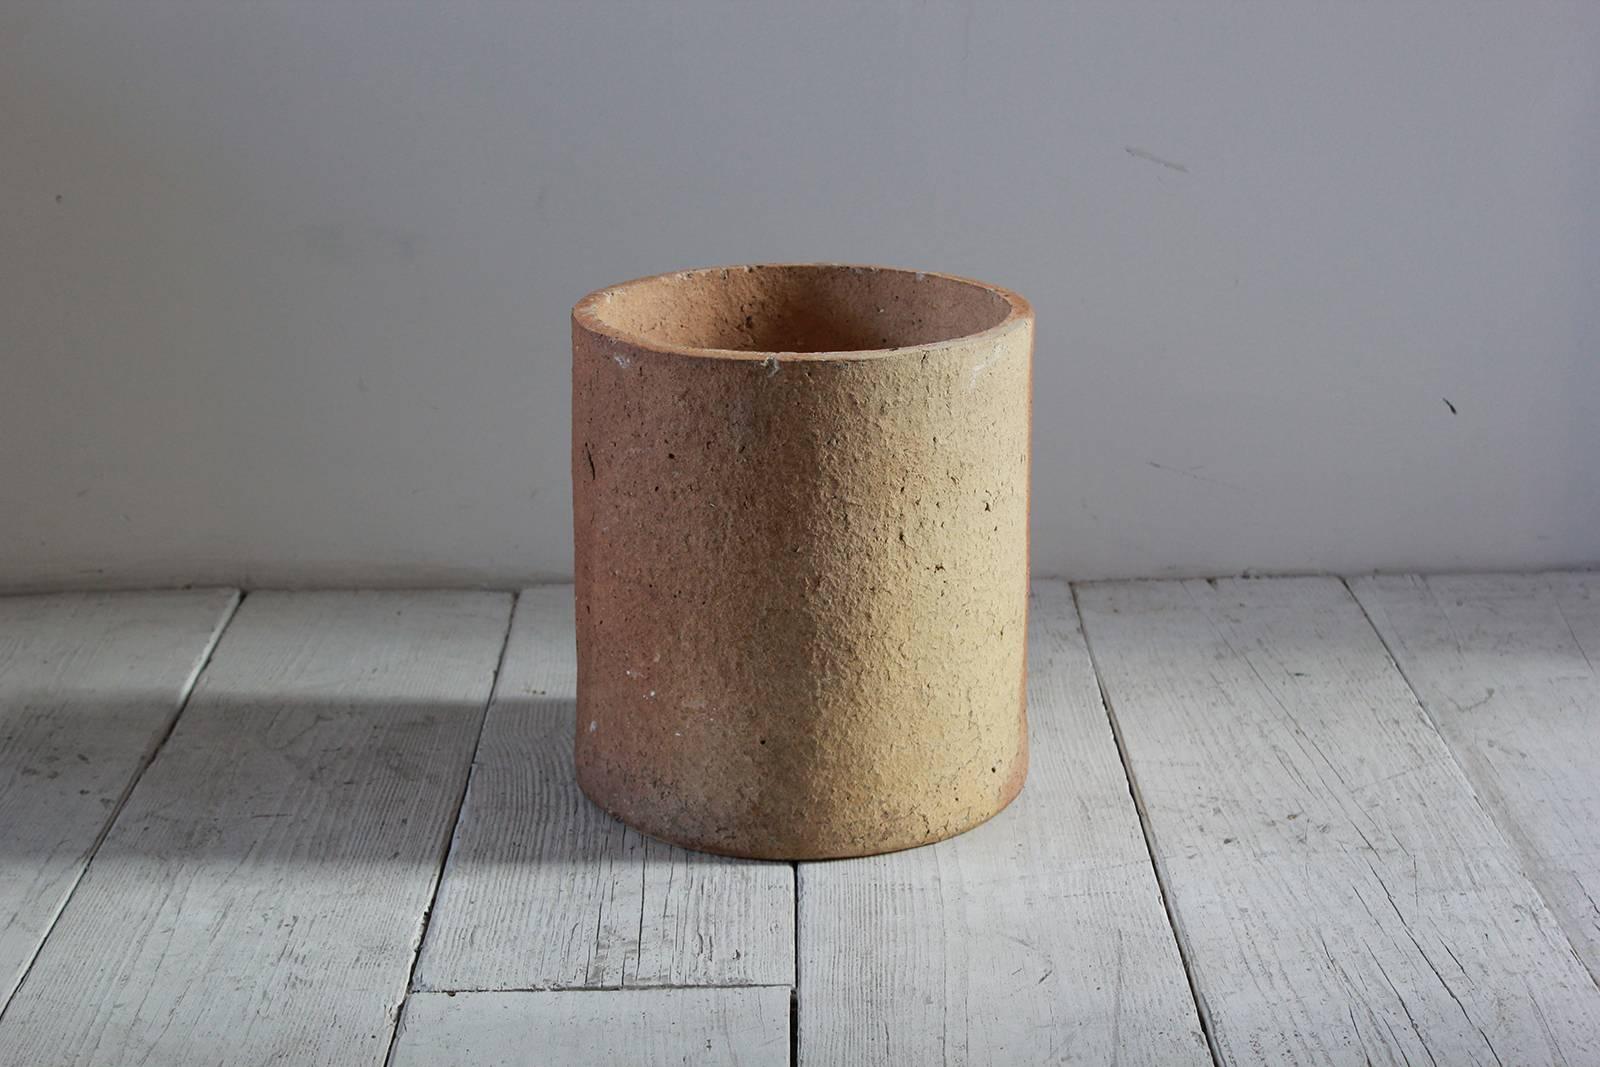 Round cylindrical cement planter see various patina age to the color.